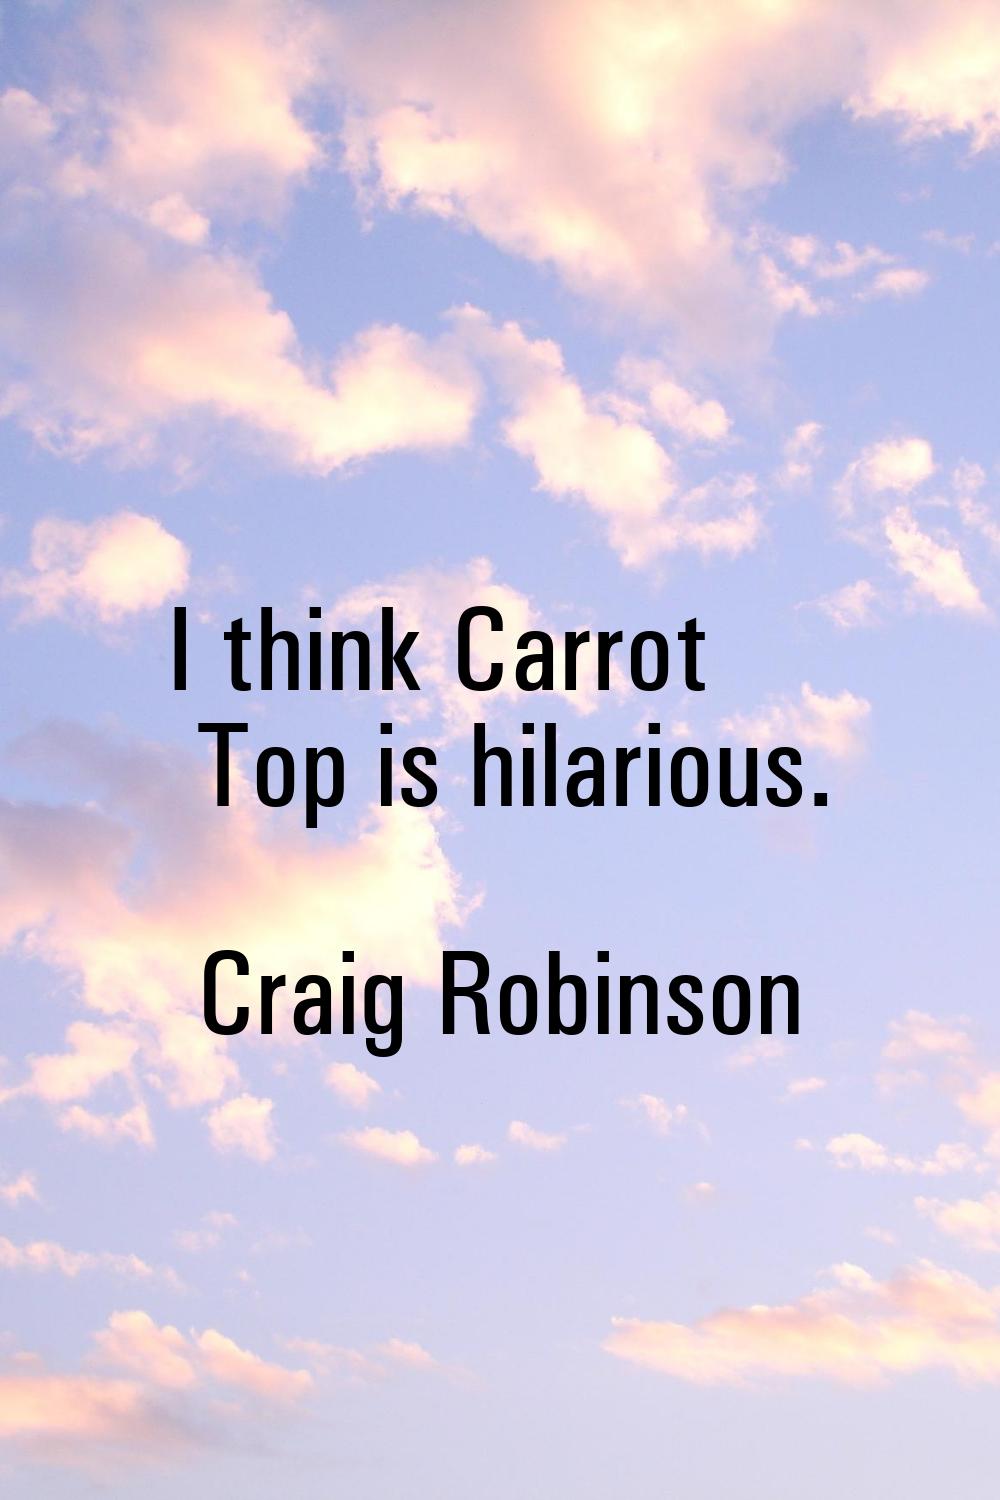 I think Carrot Top is hilarious.